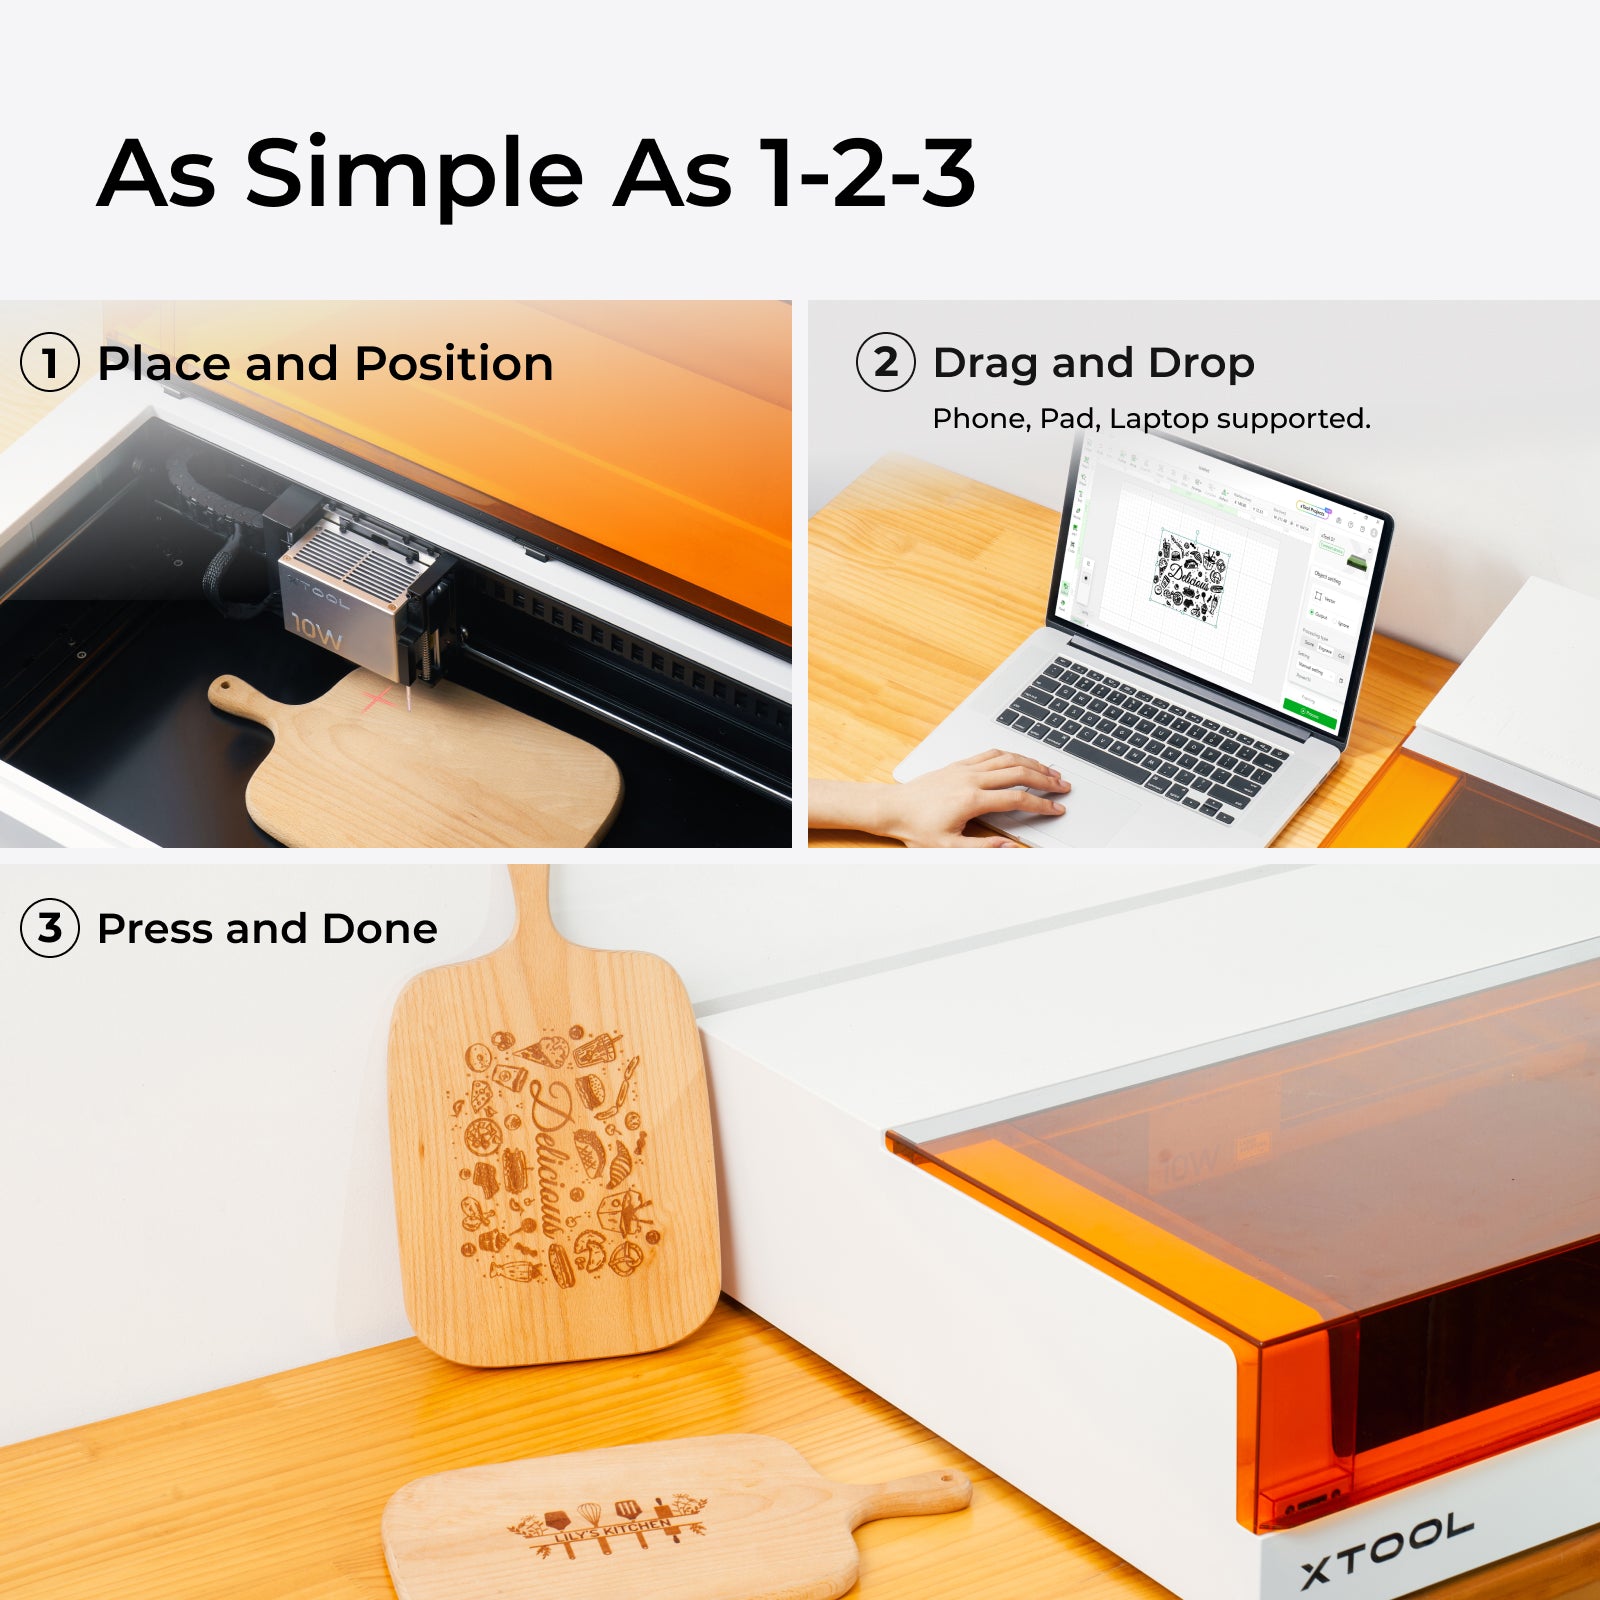 xTool S1 10W Home Craft Laser Cutter & Engraver Machine